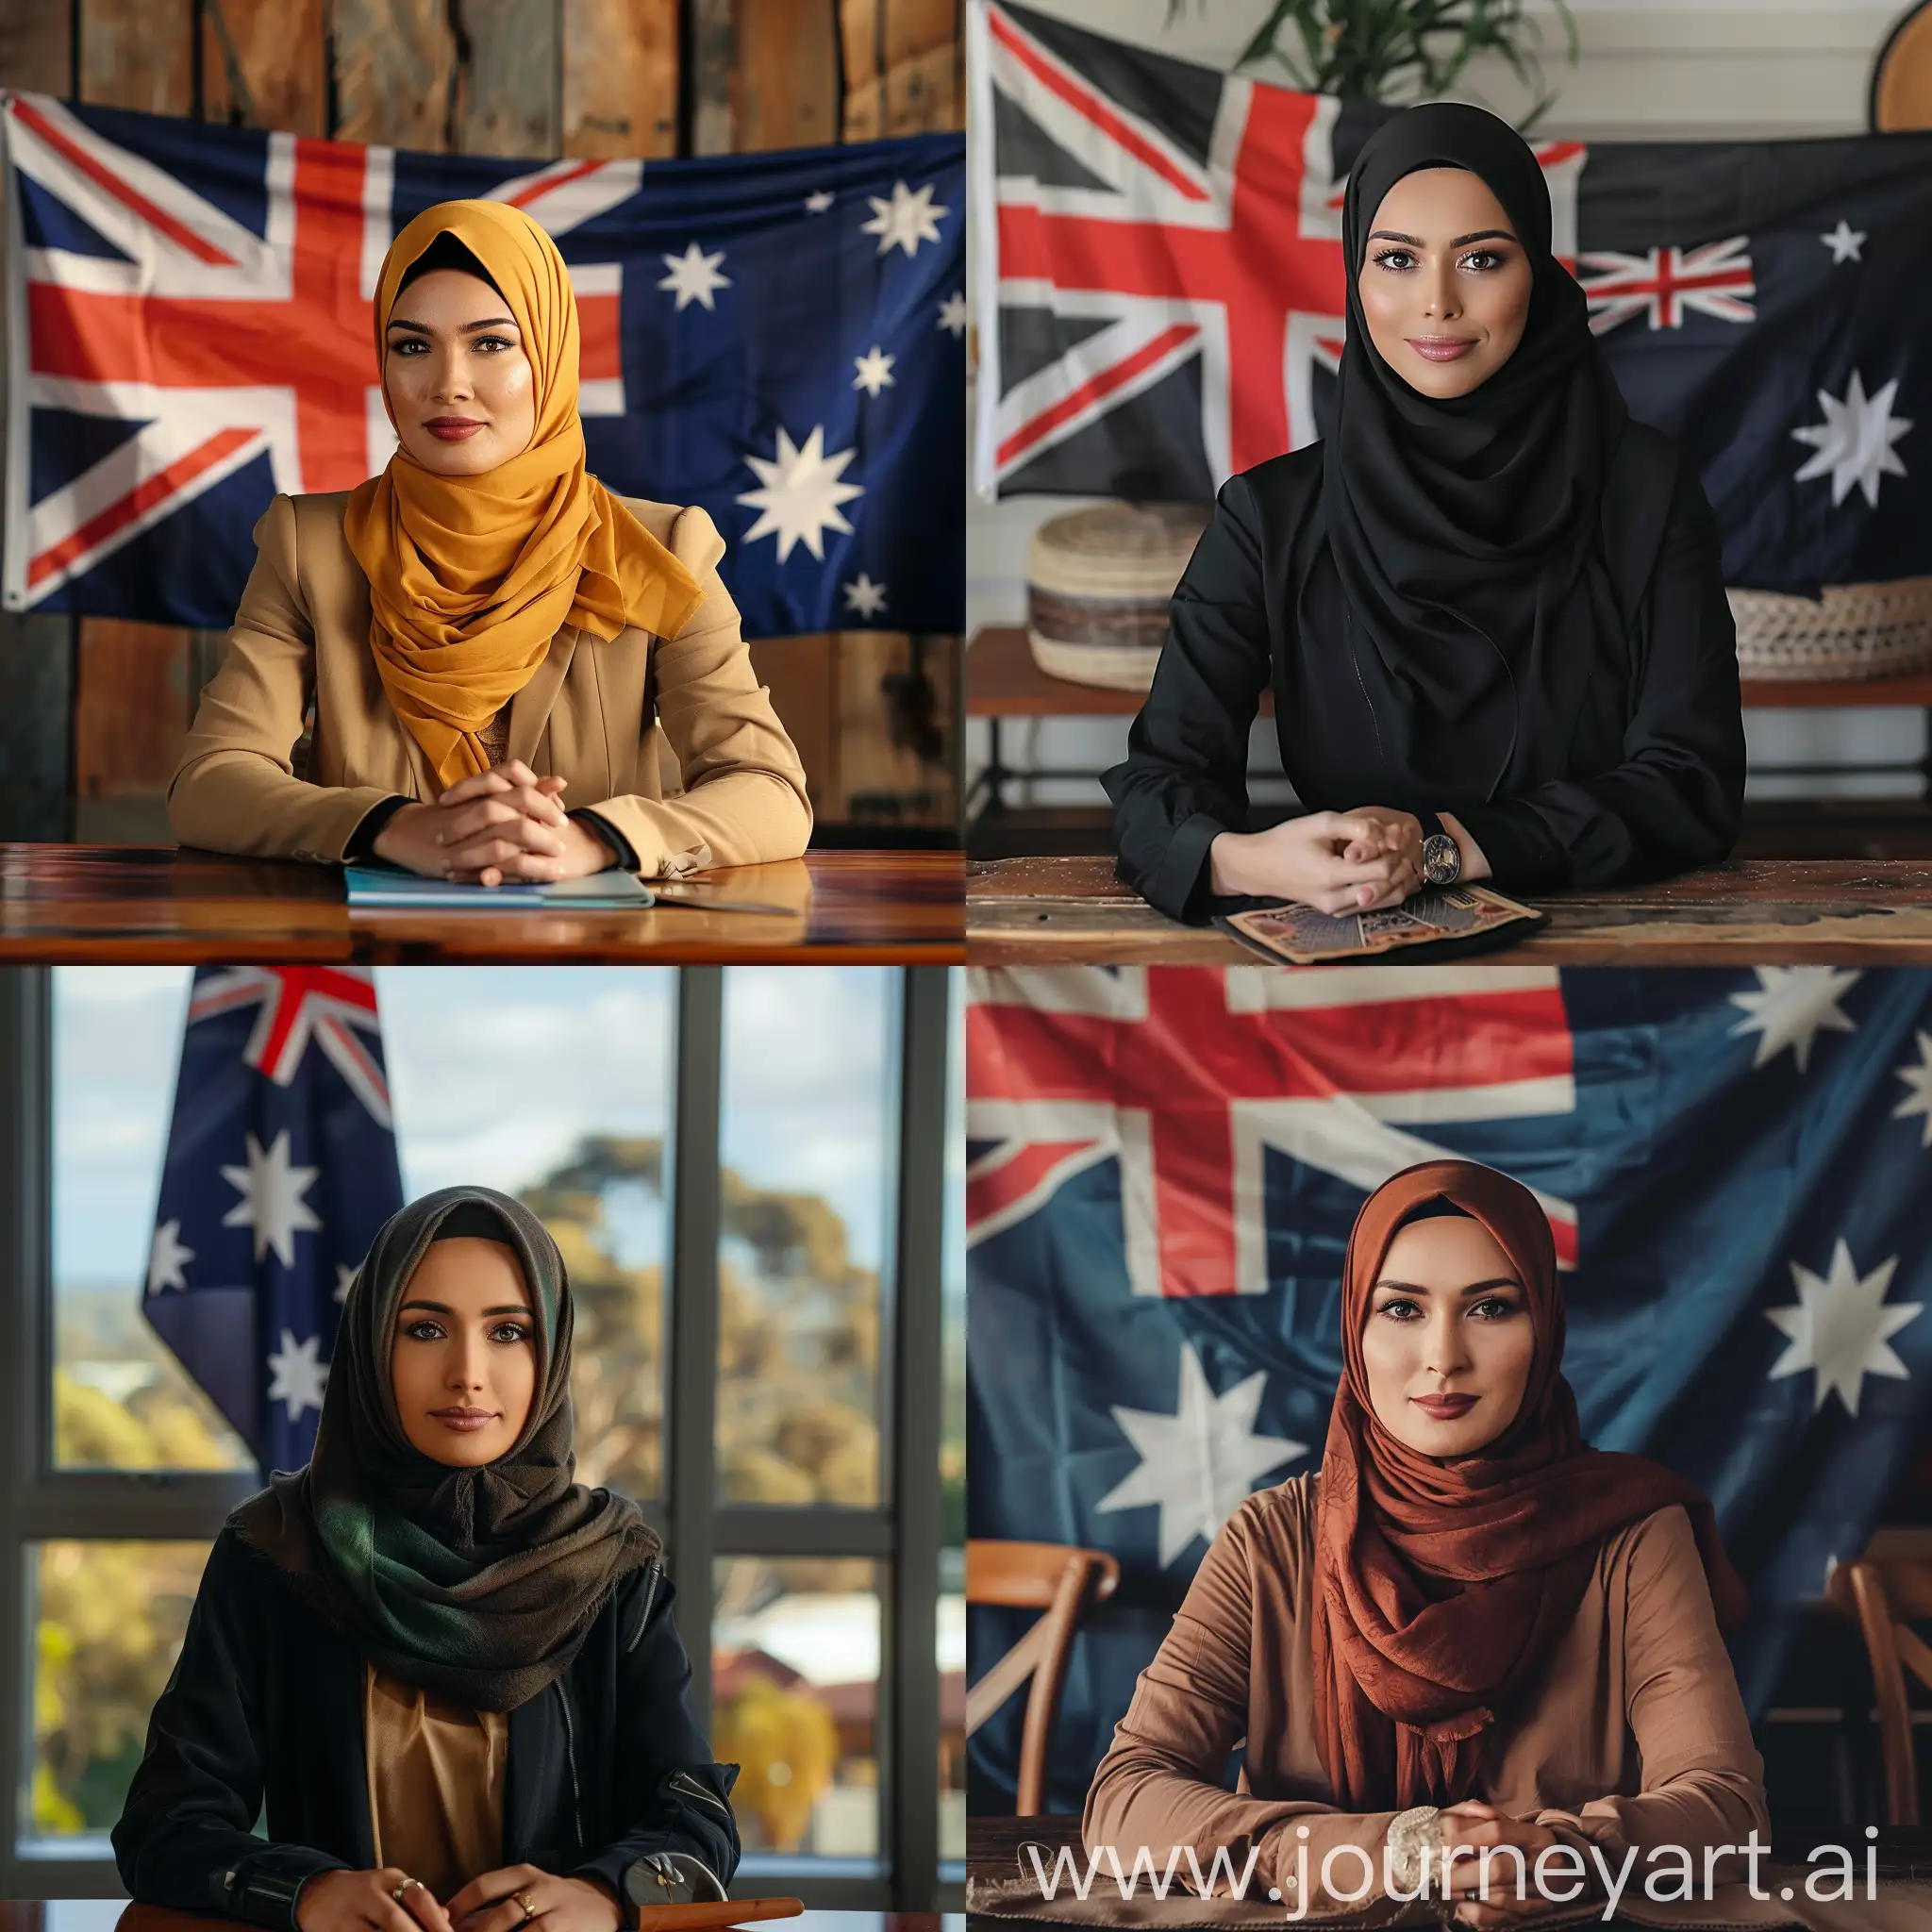  Hijab image of a charismatic woman sitting at a table with an Australian flag behind her